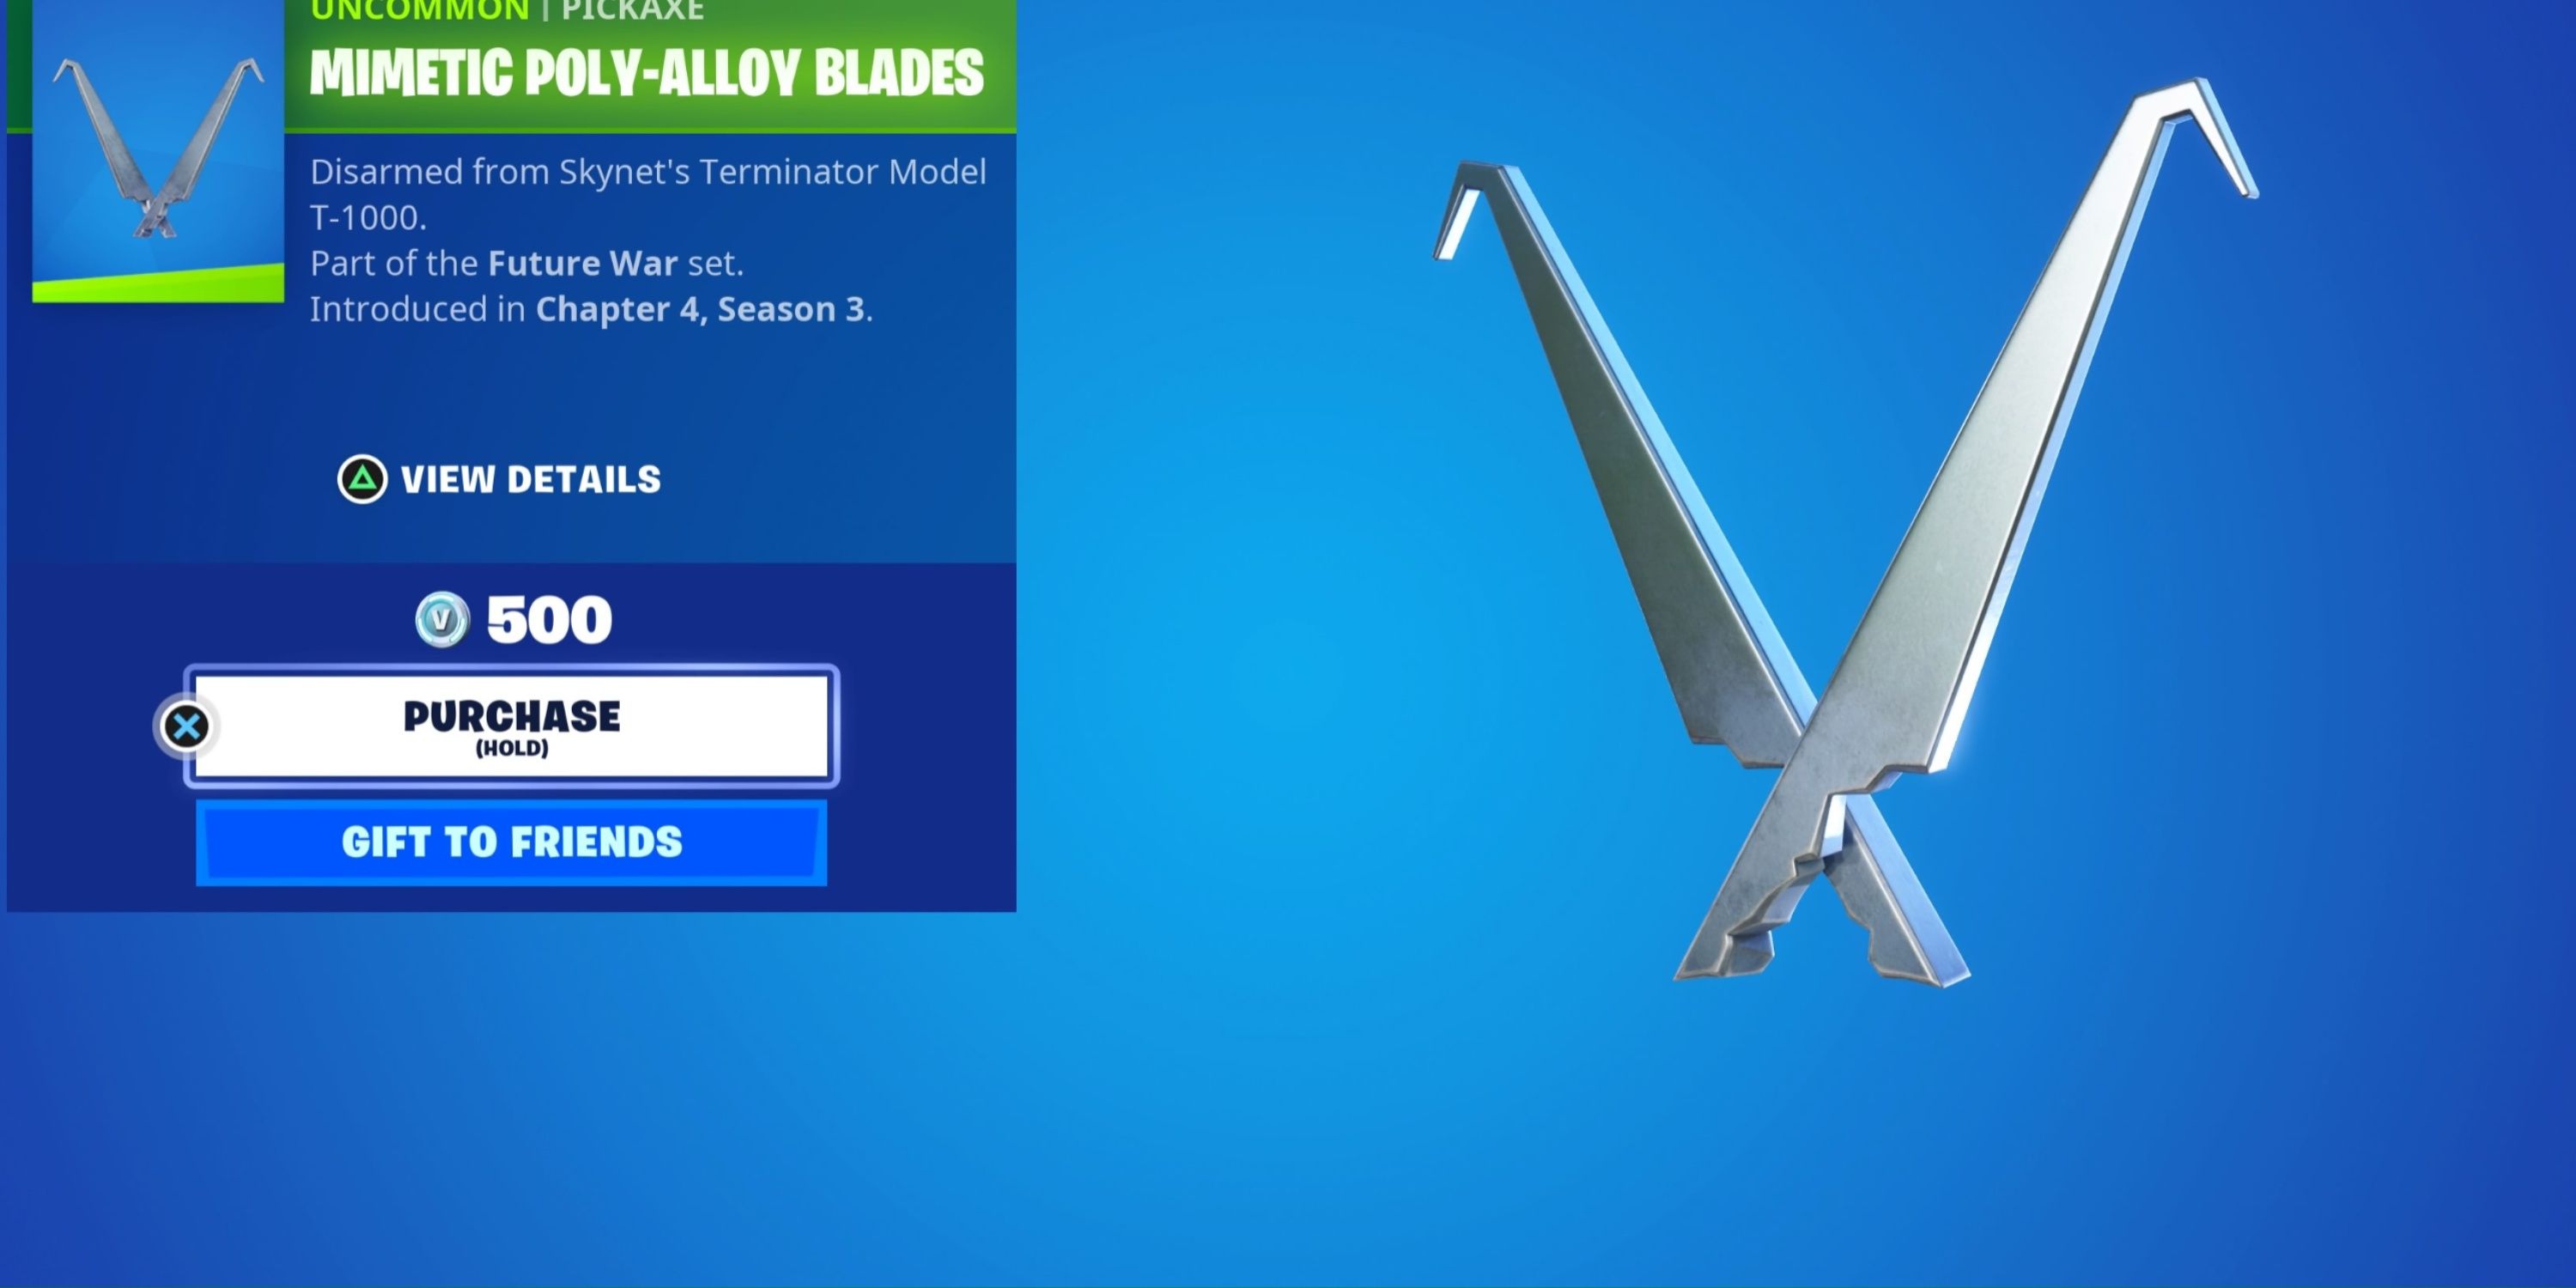 mimetic poly-ally blades pickaxe in fortnite